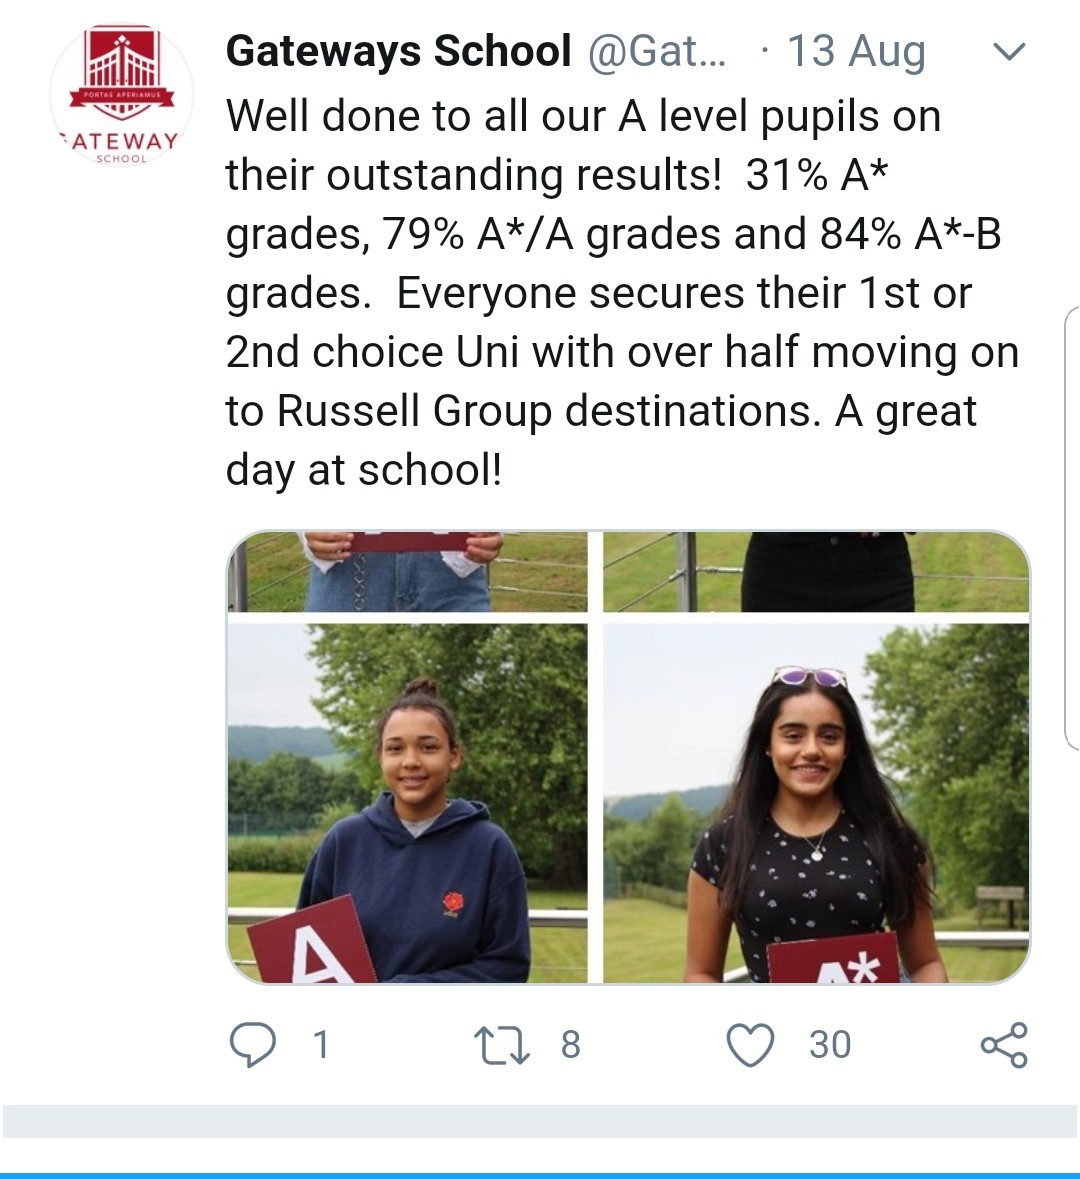 Here's a small-cohort school that got results this week on a par with Wycombe Abbey (highest performing girls school in the country).84% got A*-B this year, last year it was 'more than half'.